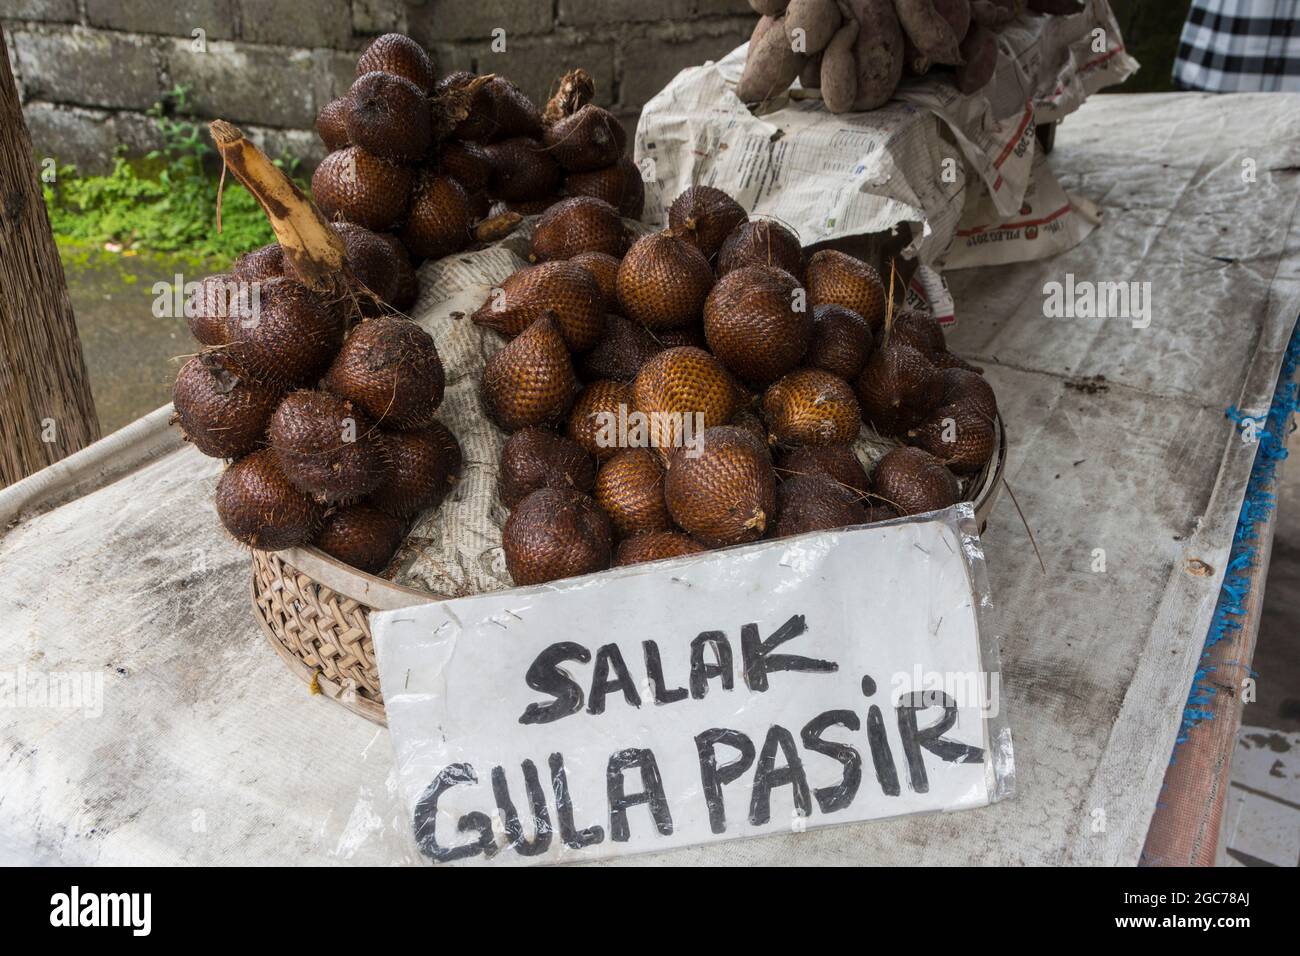 The most expensive cultivar of the Bali salak, the gula pasir (literally 'sand sugar' or 'grain sugar' for sale., Bali, Indonesia Stock Photo